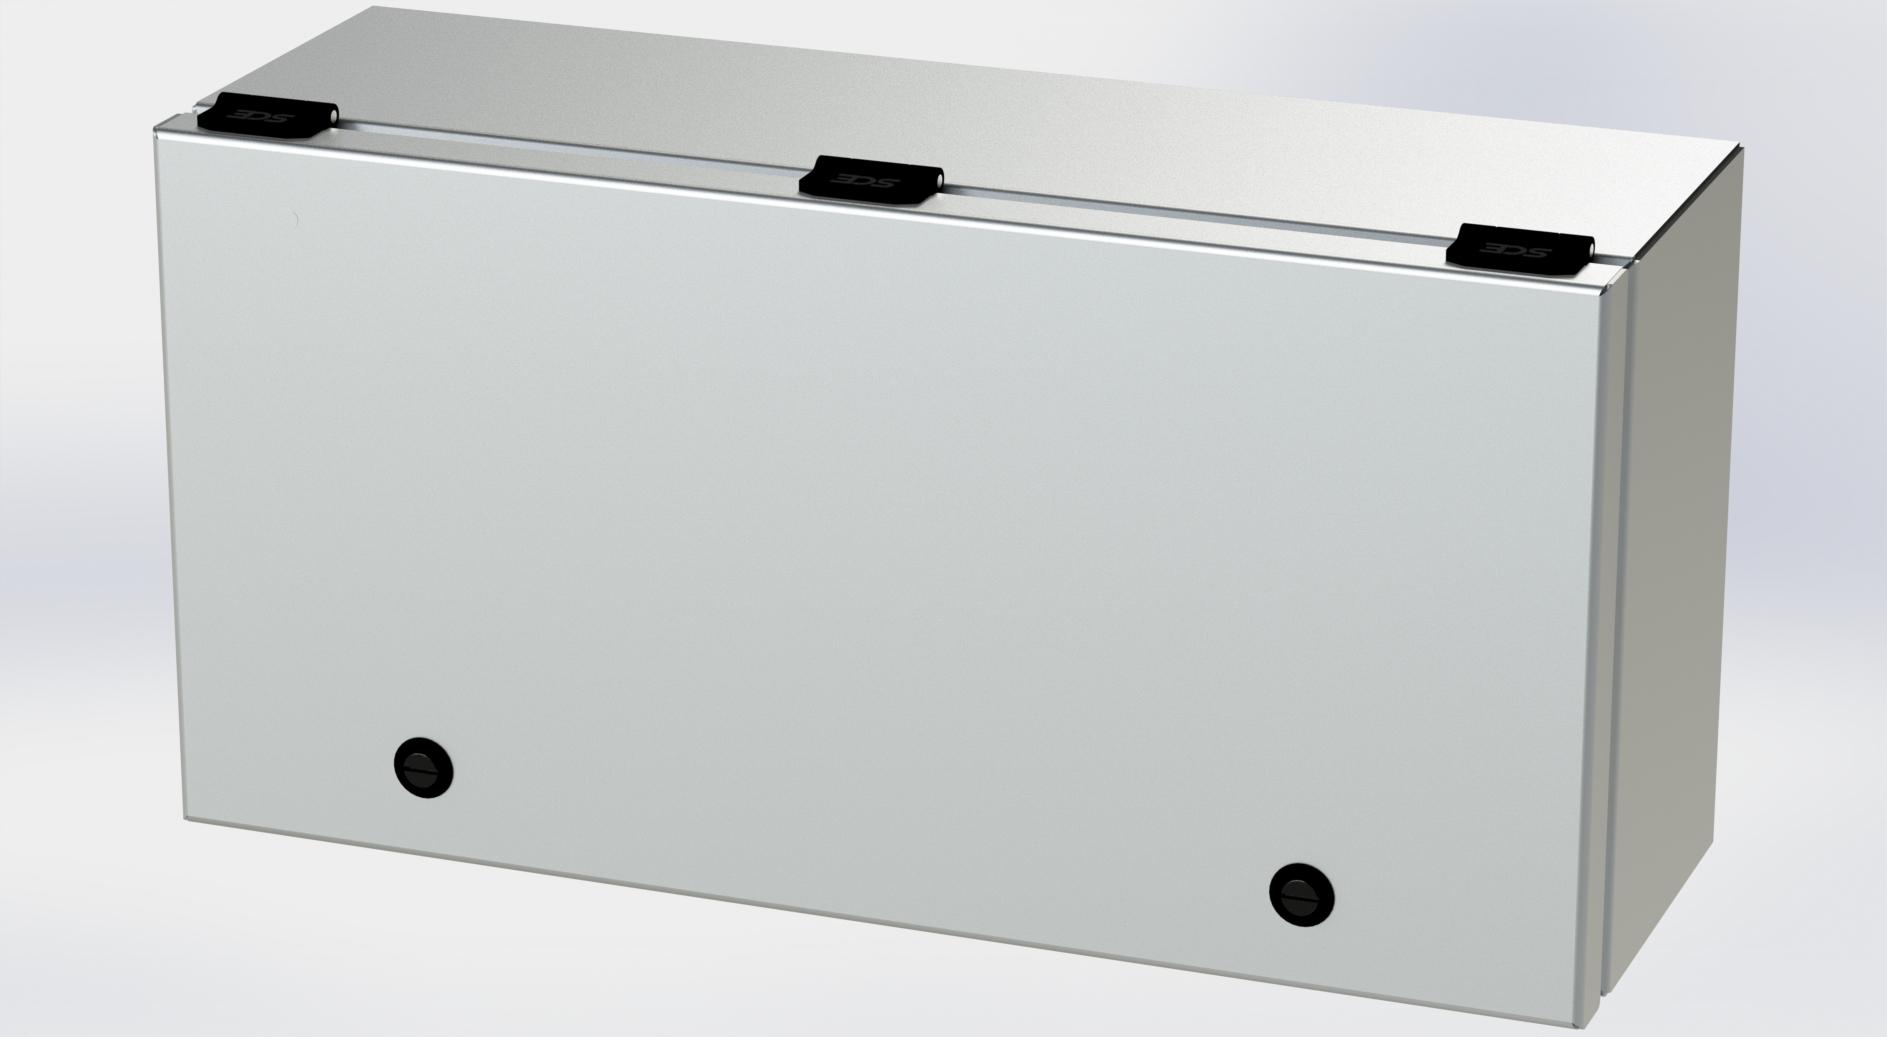 Saginaw Control SCE-L9186ELJSS S.S. ELJ Trough Enclosure, Height:9.00", Width:18.00", Depth:6.00", #4 brushed finish on all exterior surfaces. Optional sub-panels are powder coated white.